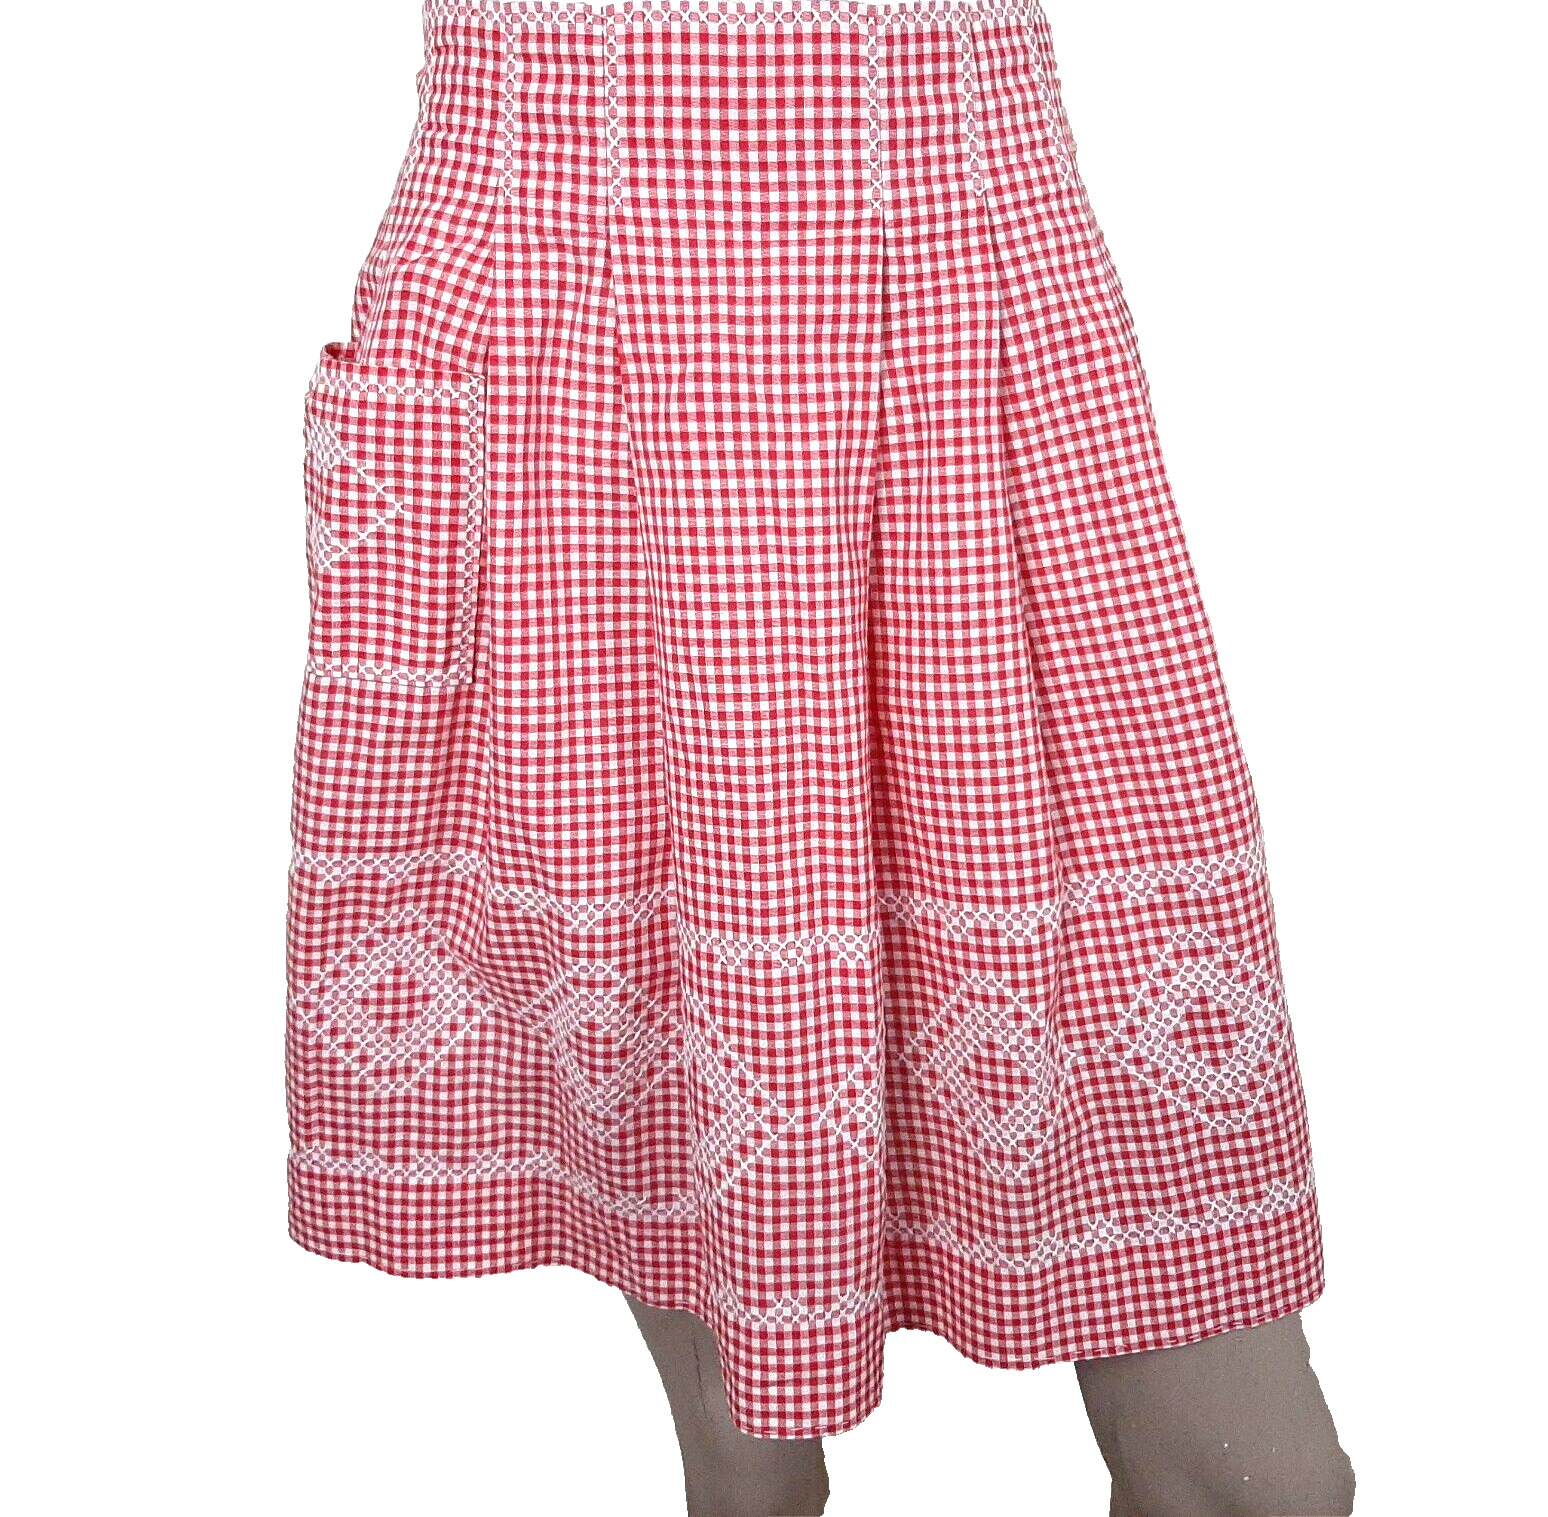 Vintage 1960s Hand Sewn Red & White Checked Embroidered Gingham Country Apron